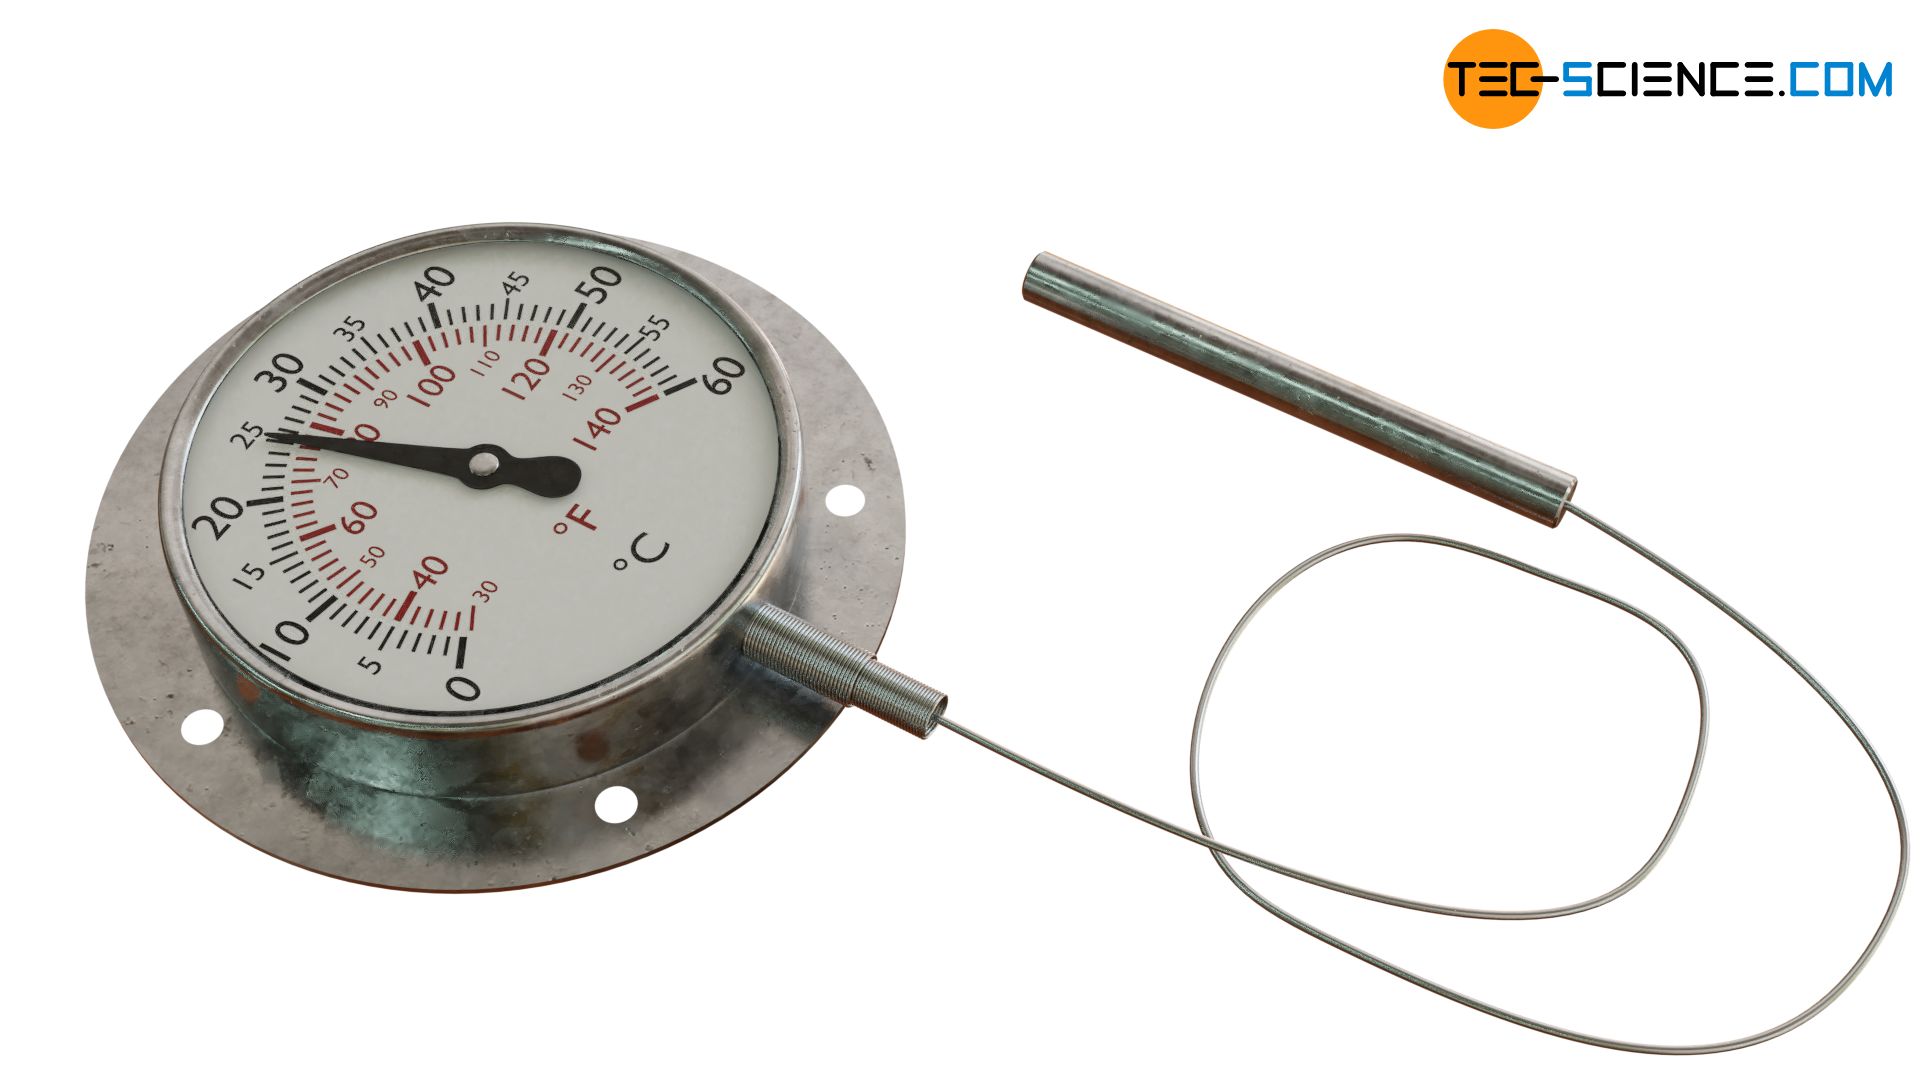 Liquid filled thermometer with flexible capillary tube